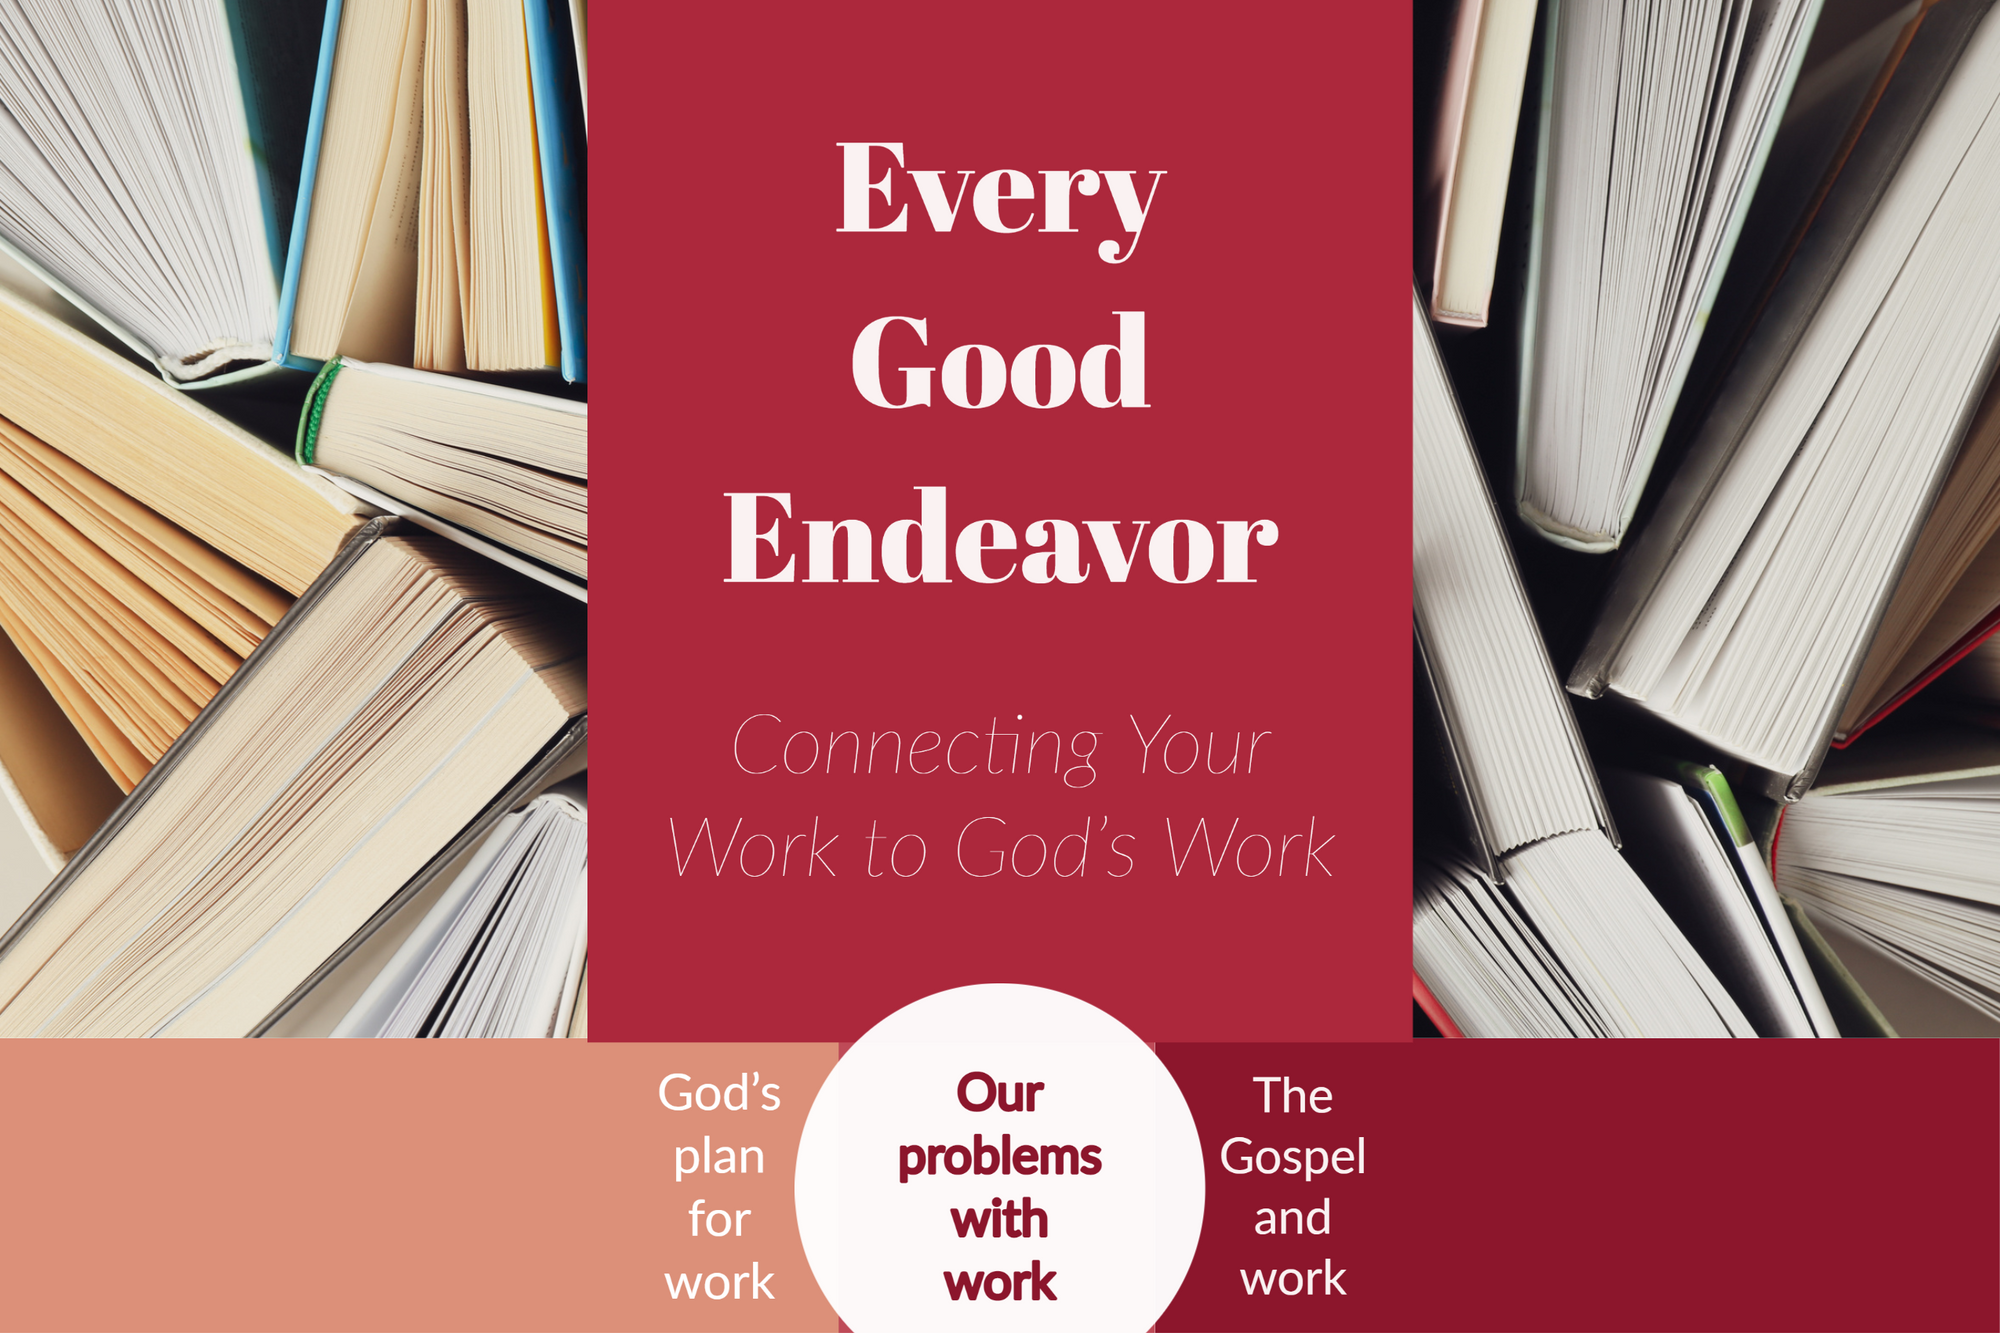 Our problems with work (Every Good Endeavor - Part 2)